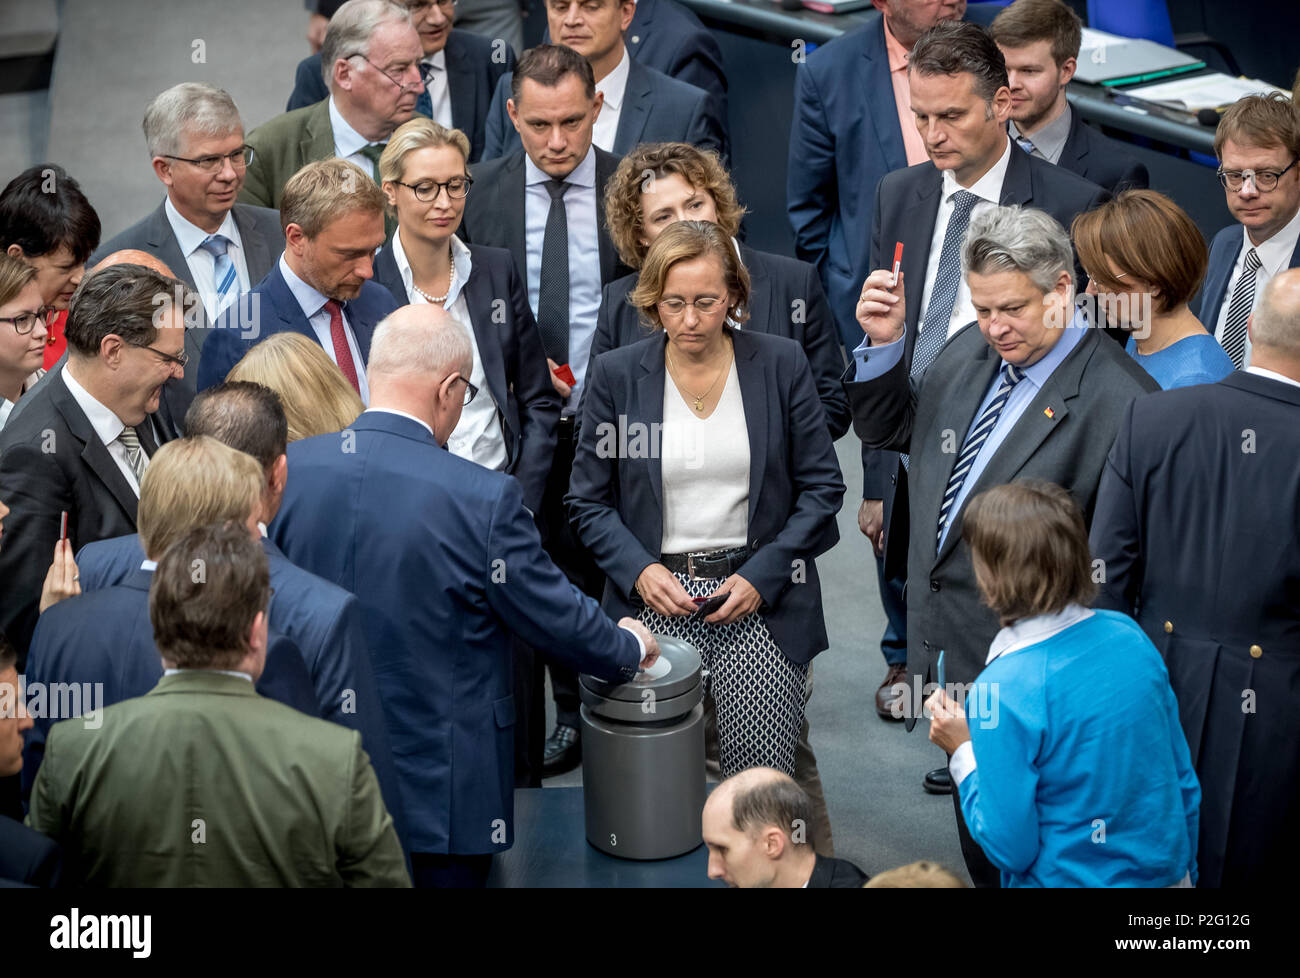 15 June 2018, Germany, Berlin: Federal deputies casting their ballots during a roll call vote on party finances in the plenary hall of the Bundestag. The German Bundestag discussed in its meeting, among other things, party finances and reunion of migant families. Photo: Michael Kappeler/dpa Stock Photo